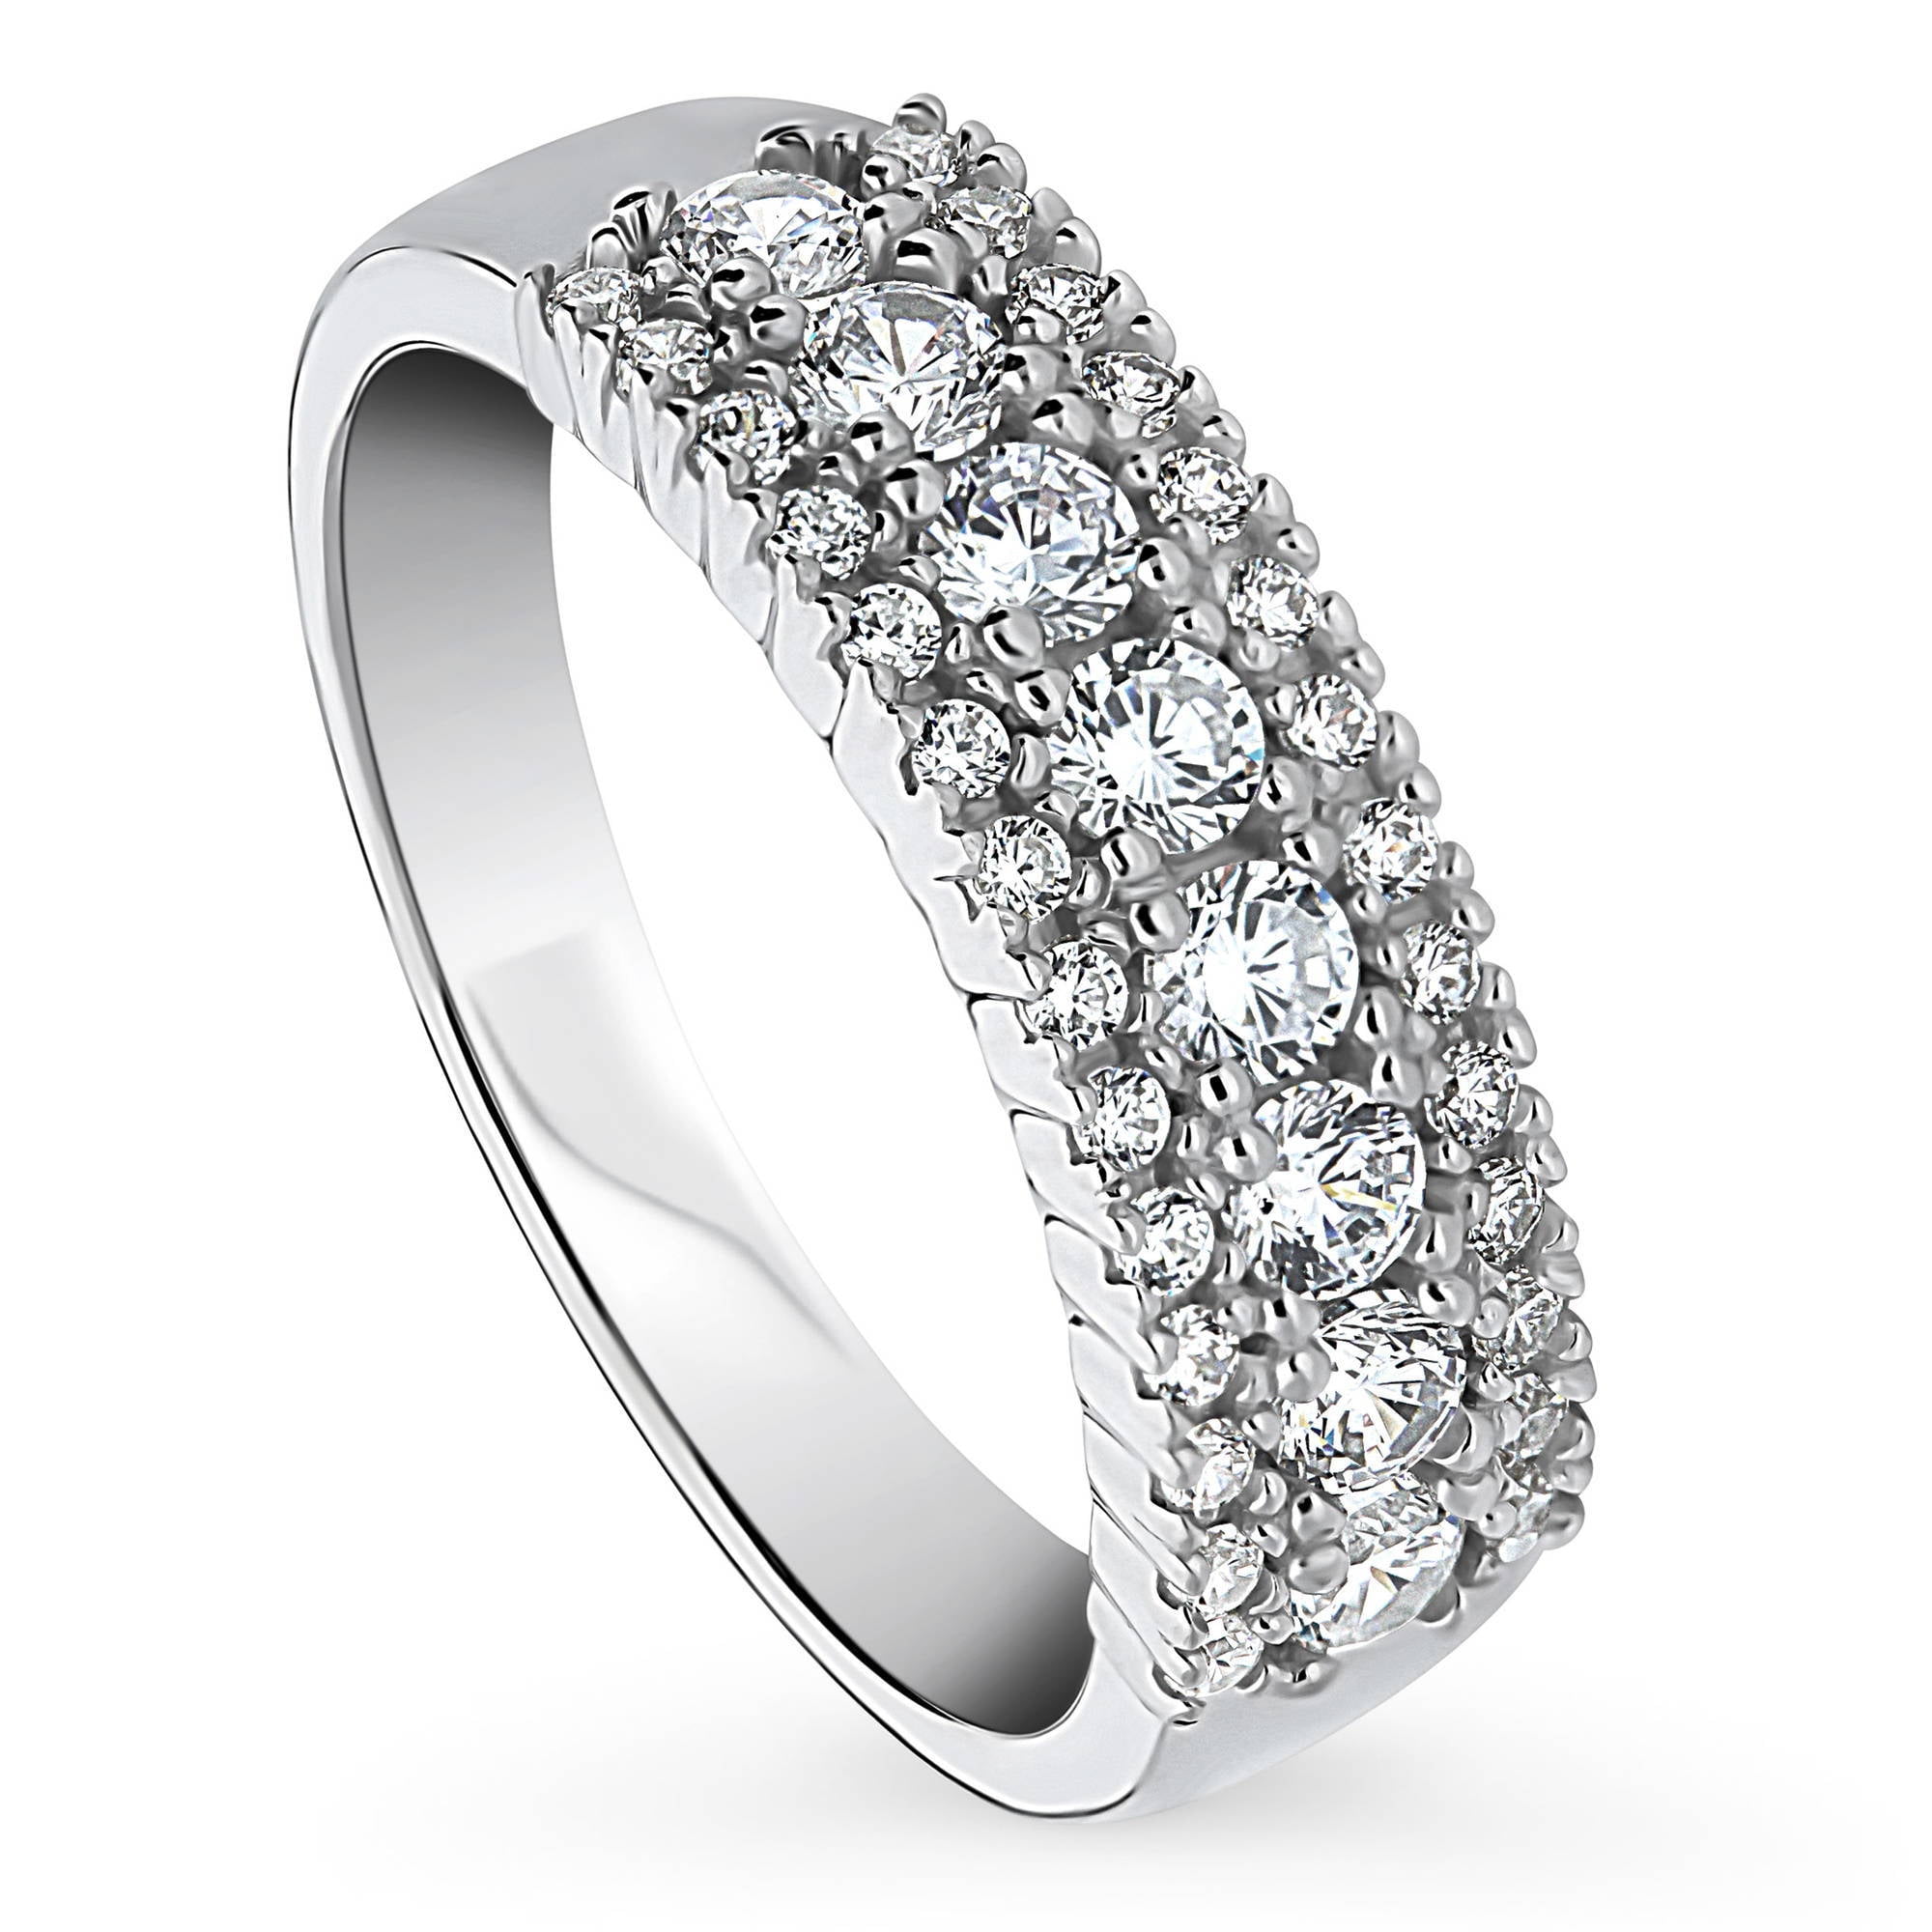 BERRICLE Rhodium Plated Sterling Silver Cubic Zirconia CZ Statement  Anniversary Wedding Half Eternity Band Ring Size 5